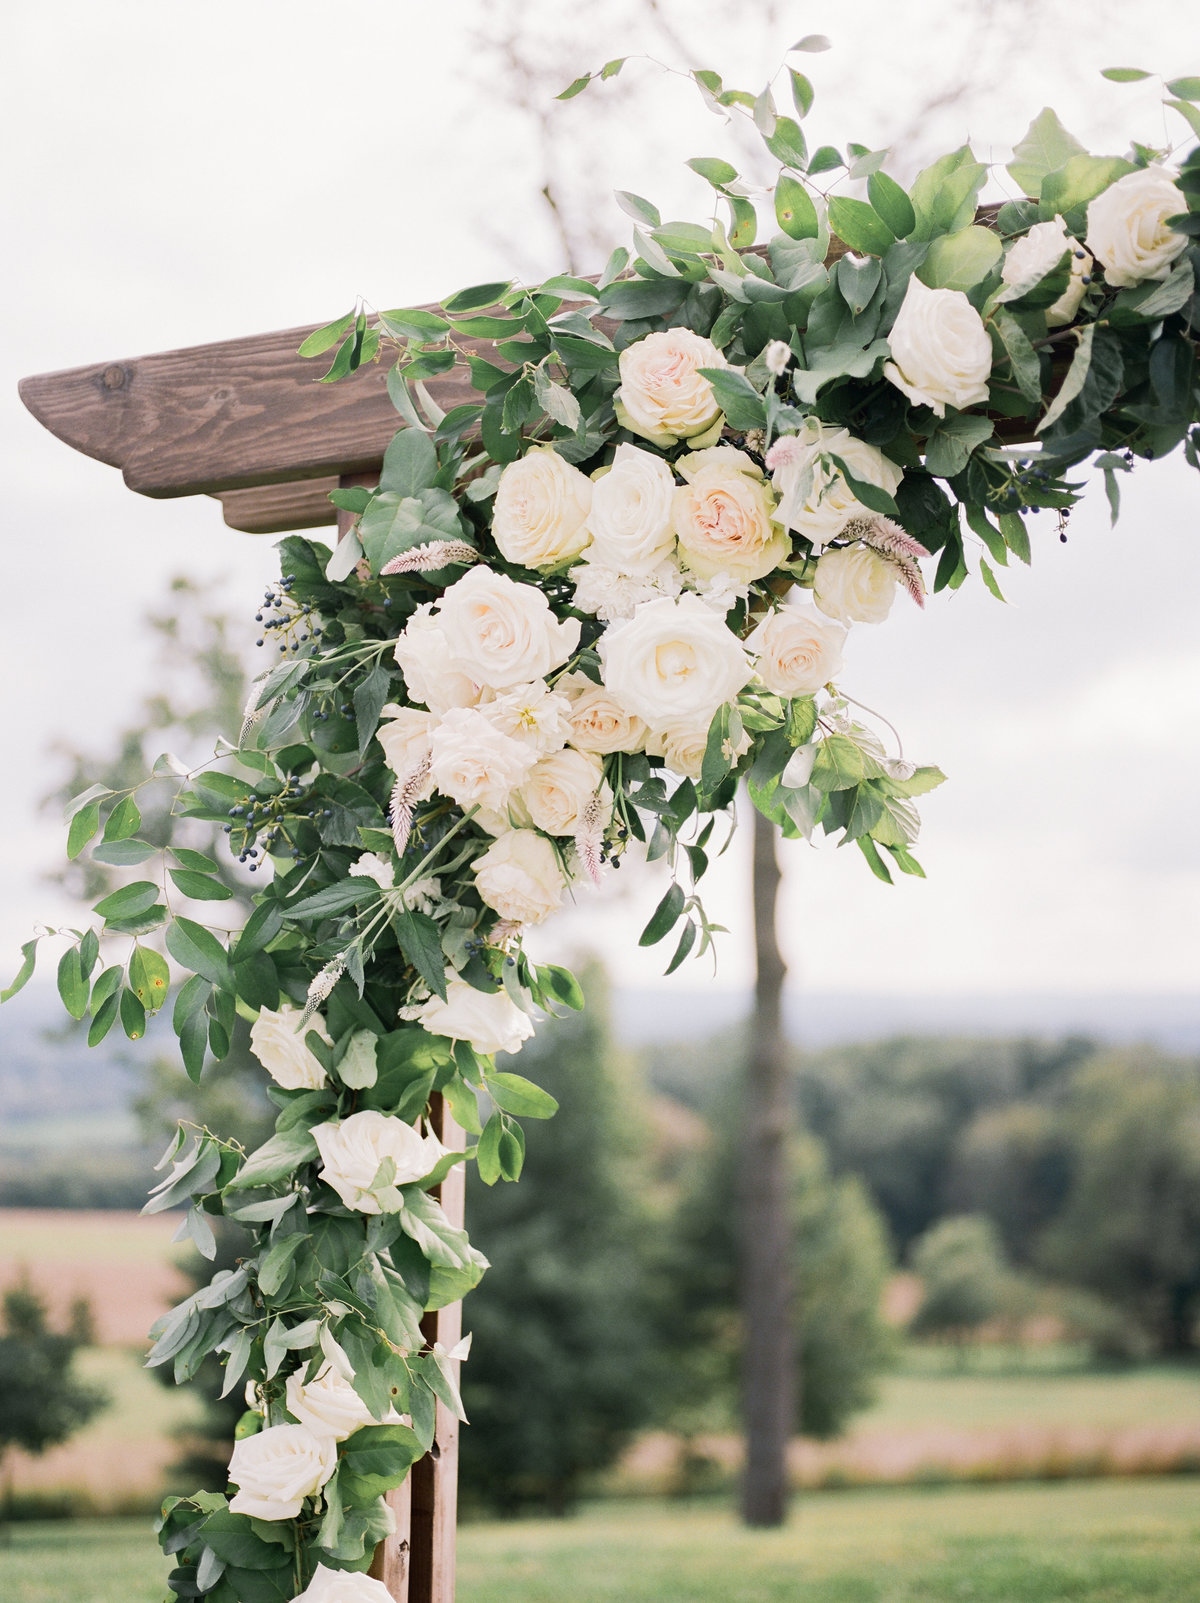 wooden wedding alter with white roses and greenery